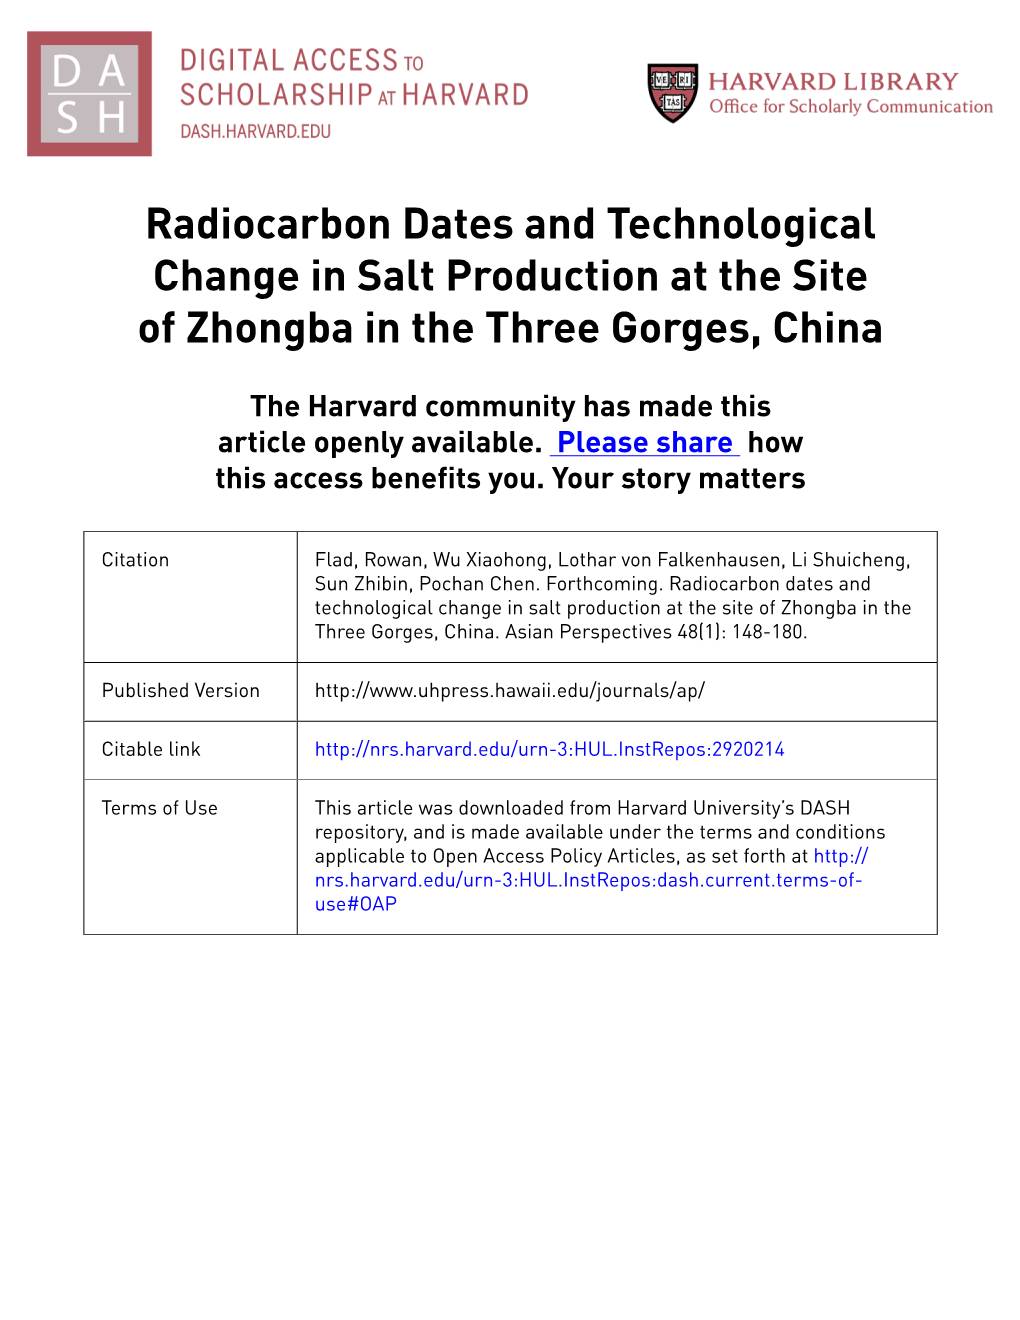 Radiocarbon Dates and Technological Change in Salt Production at the Site of Zhongba in the Three Gorges, China